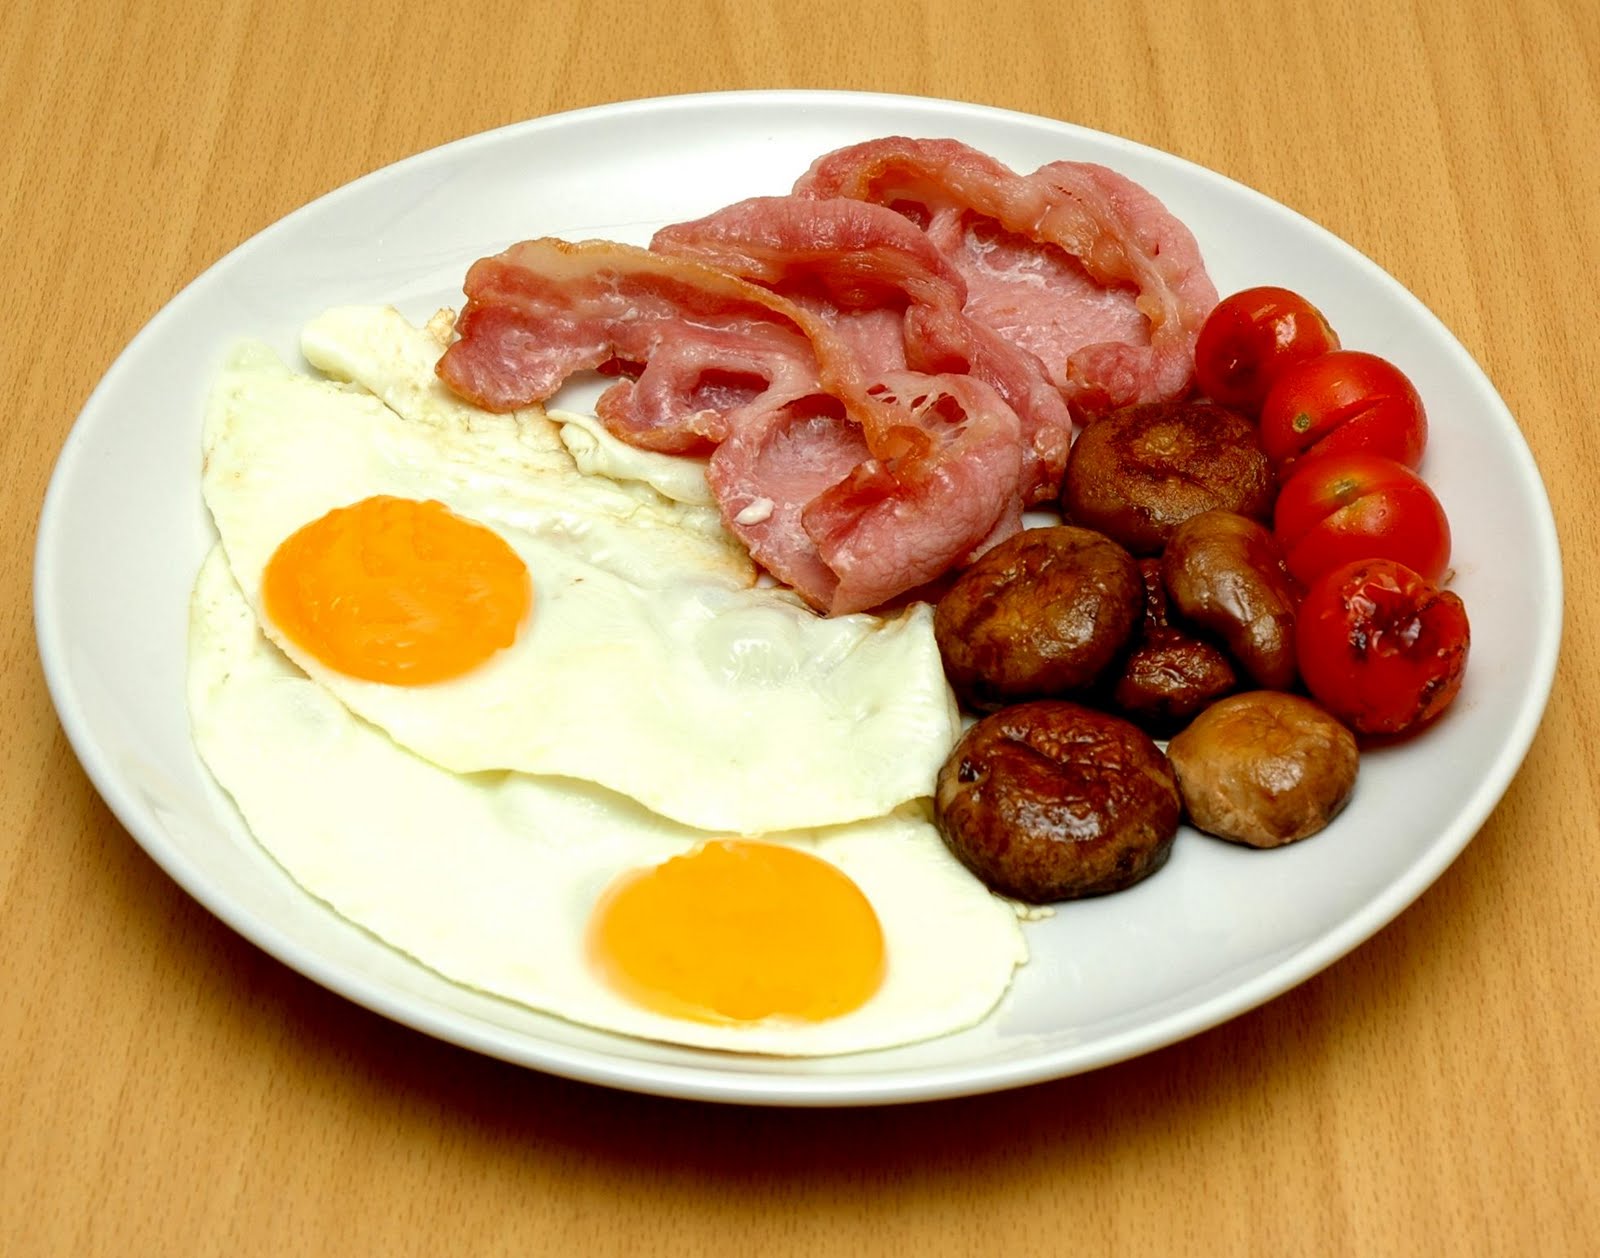 Low carbohydrate breakfast